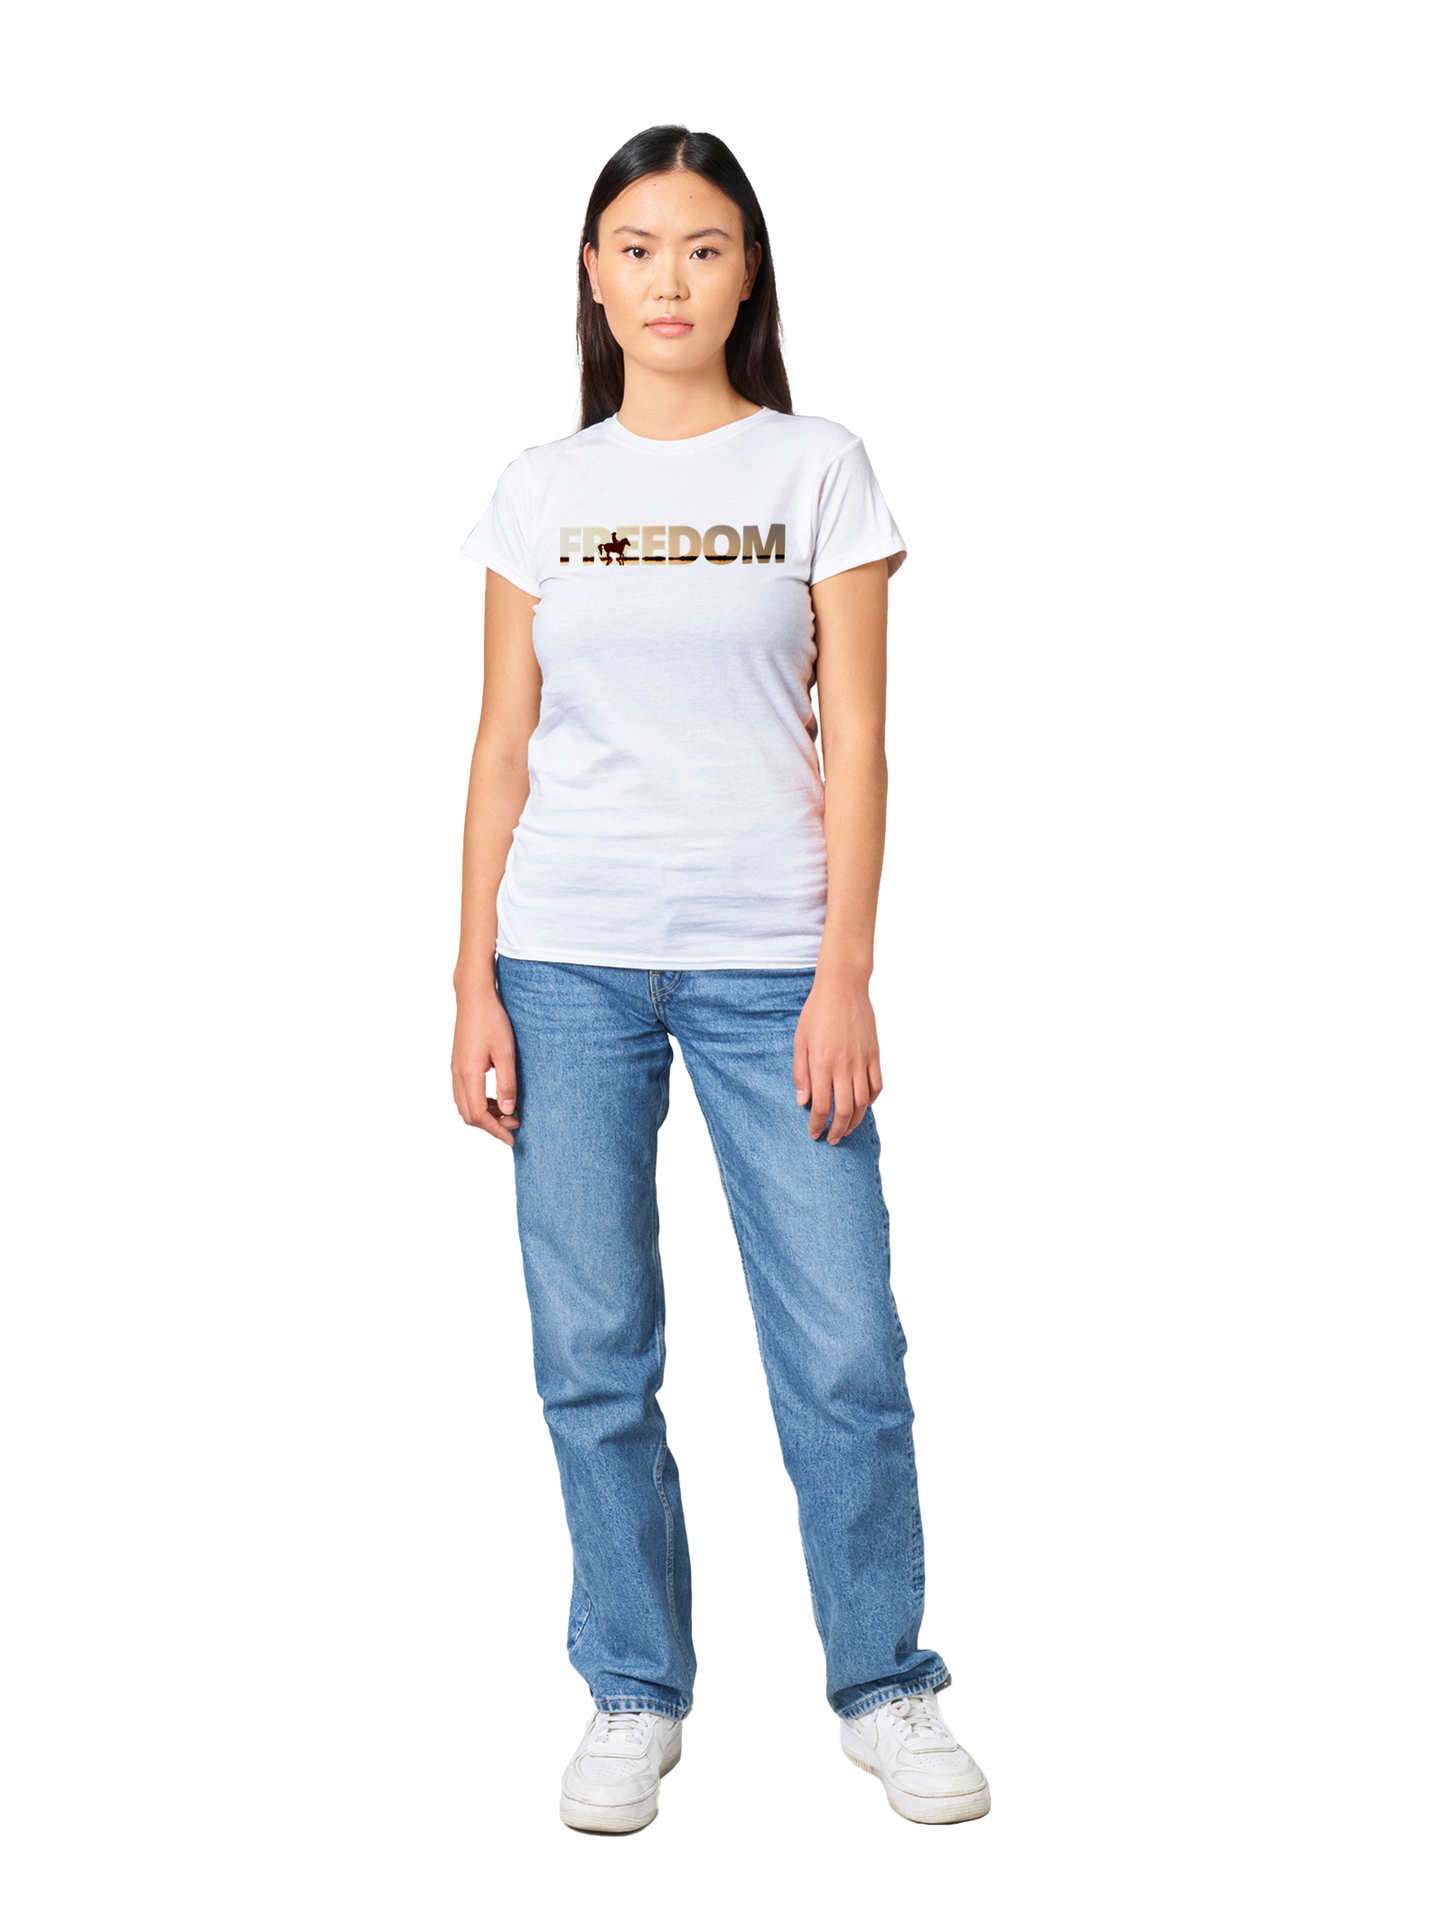 Hand Drawn Horse || Women's Crewneck T-shirt - Design: "FREEDOM"; Static Design; Personalizable Back Text